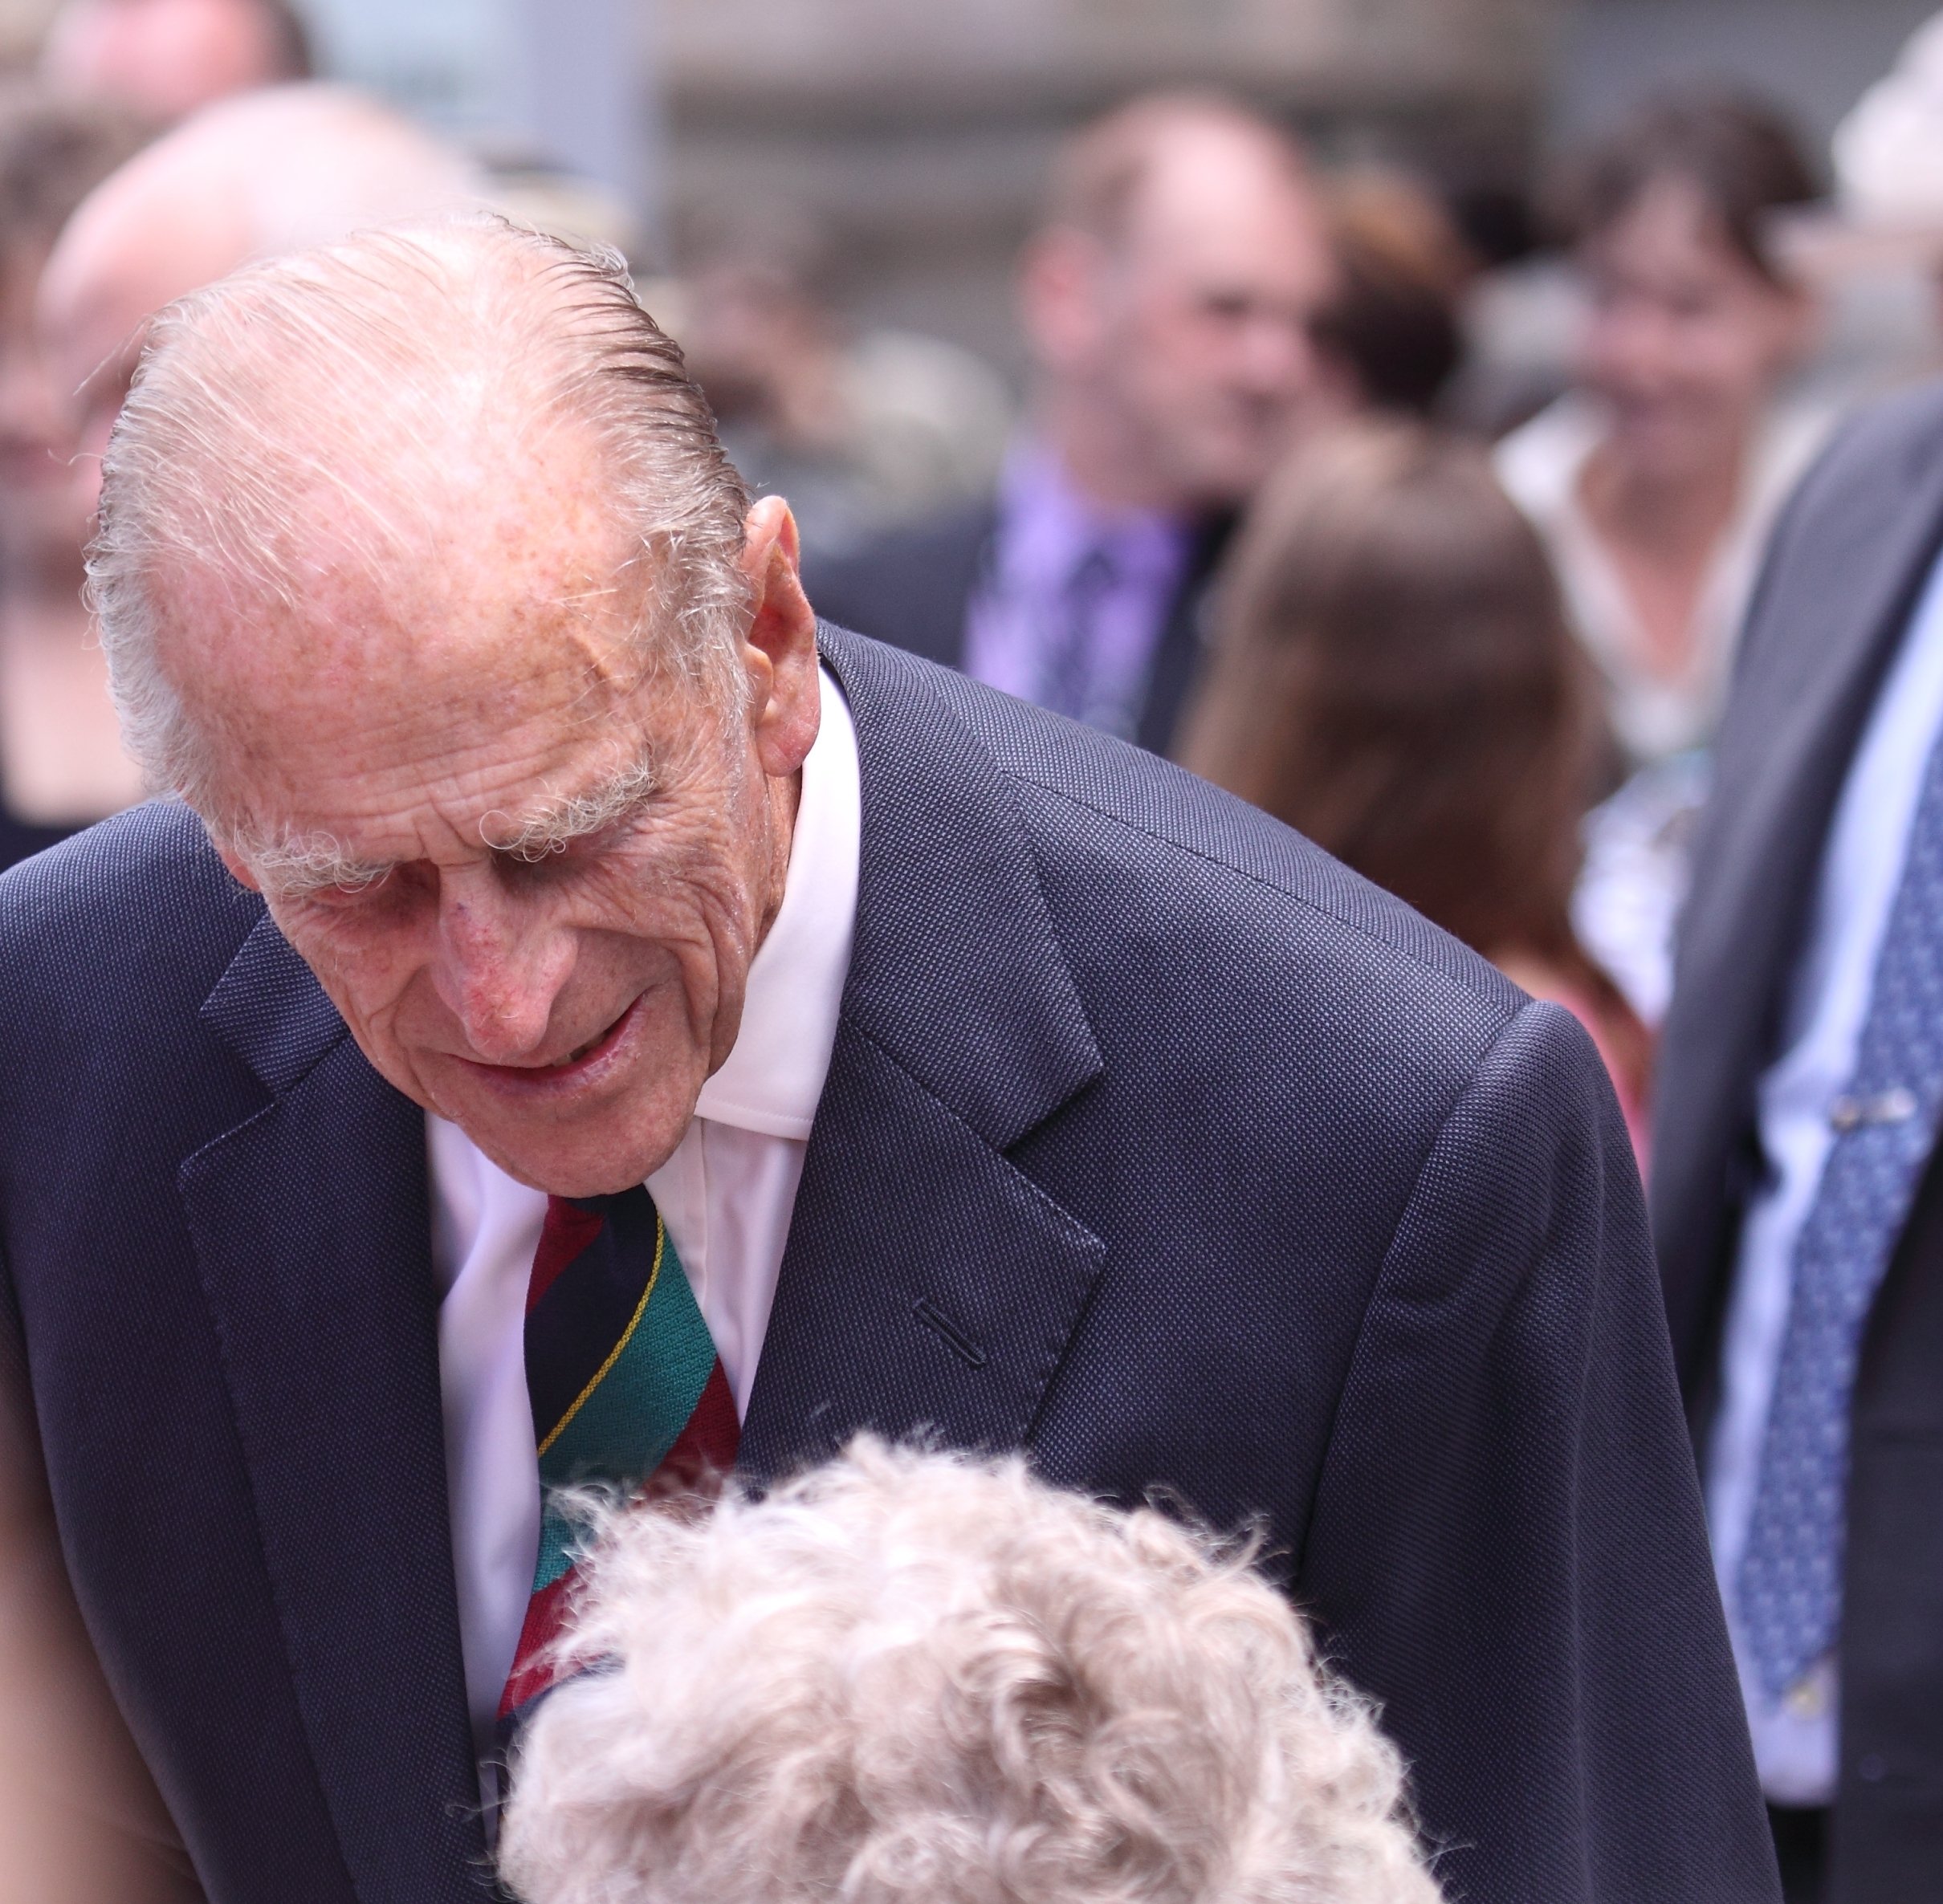 Prince Philip talks to an admirer during his visit to Ottawa with Queen Elizabeth II on June 30, 2010, in Ottawa, Canada | Photo: Shutterstock